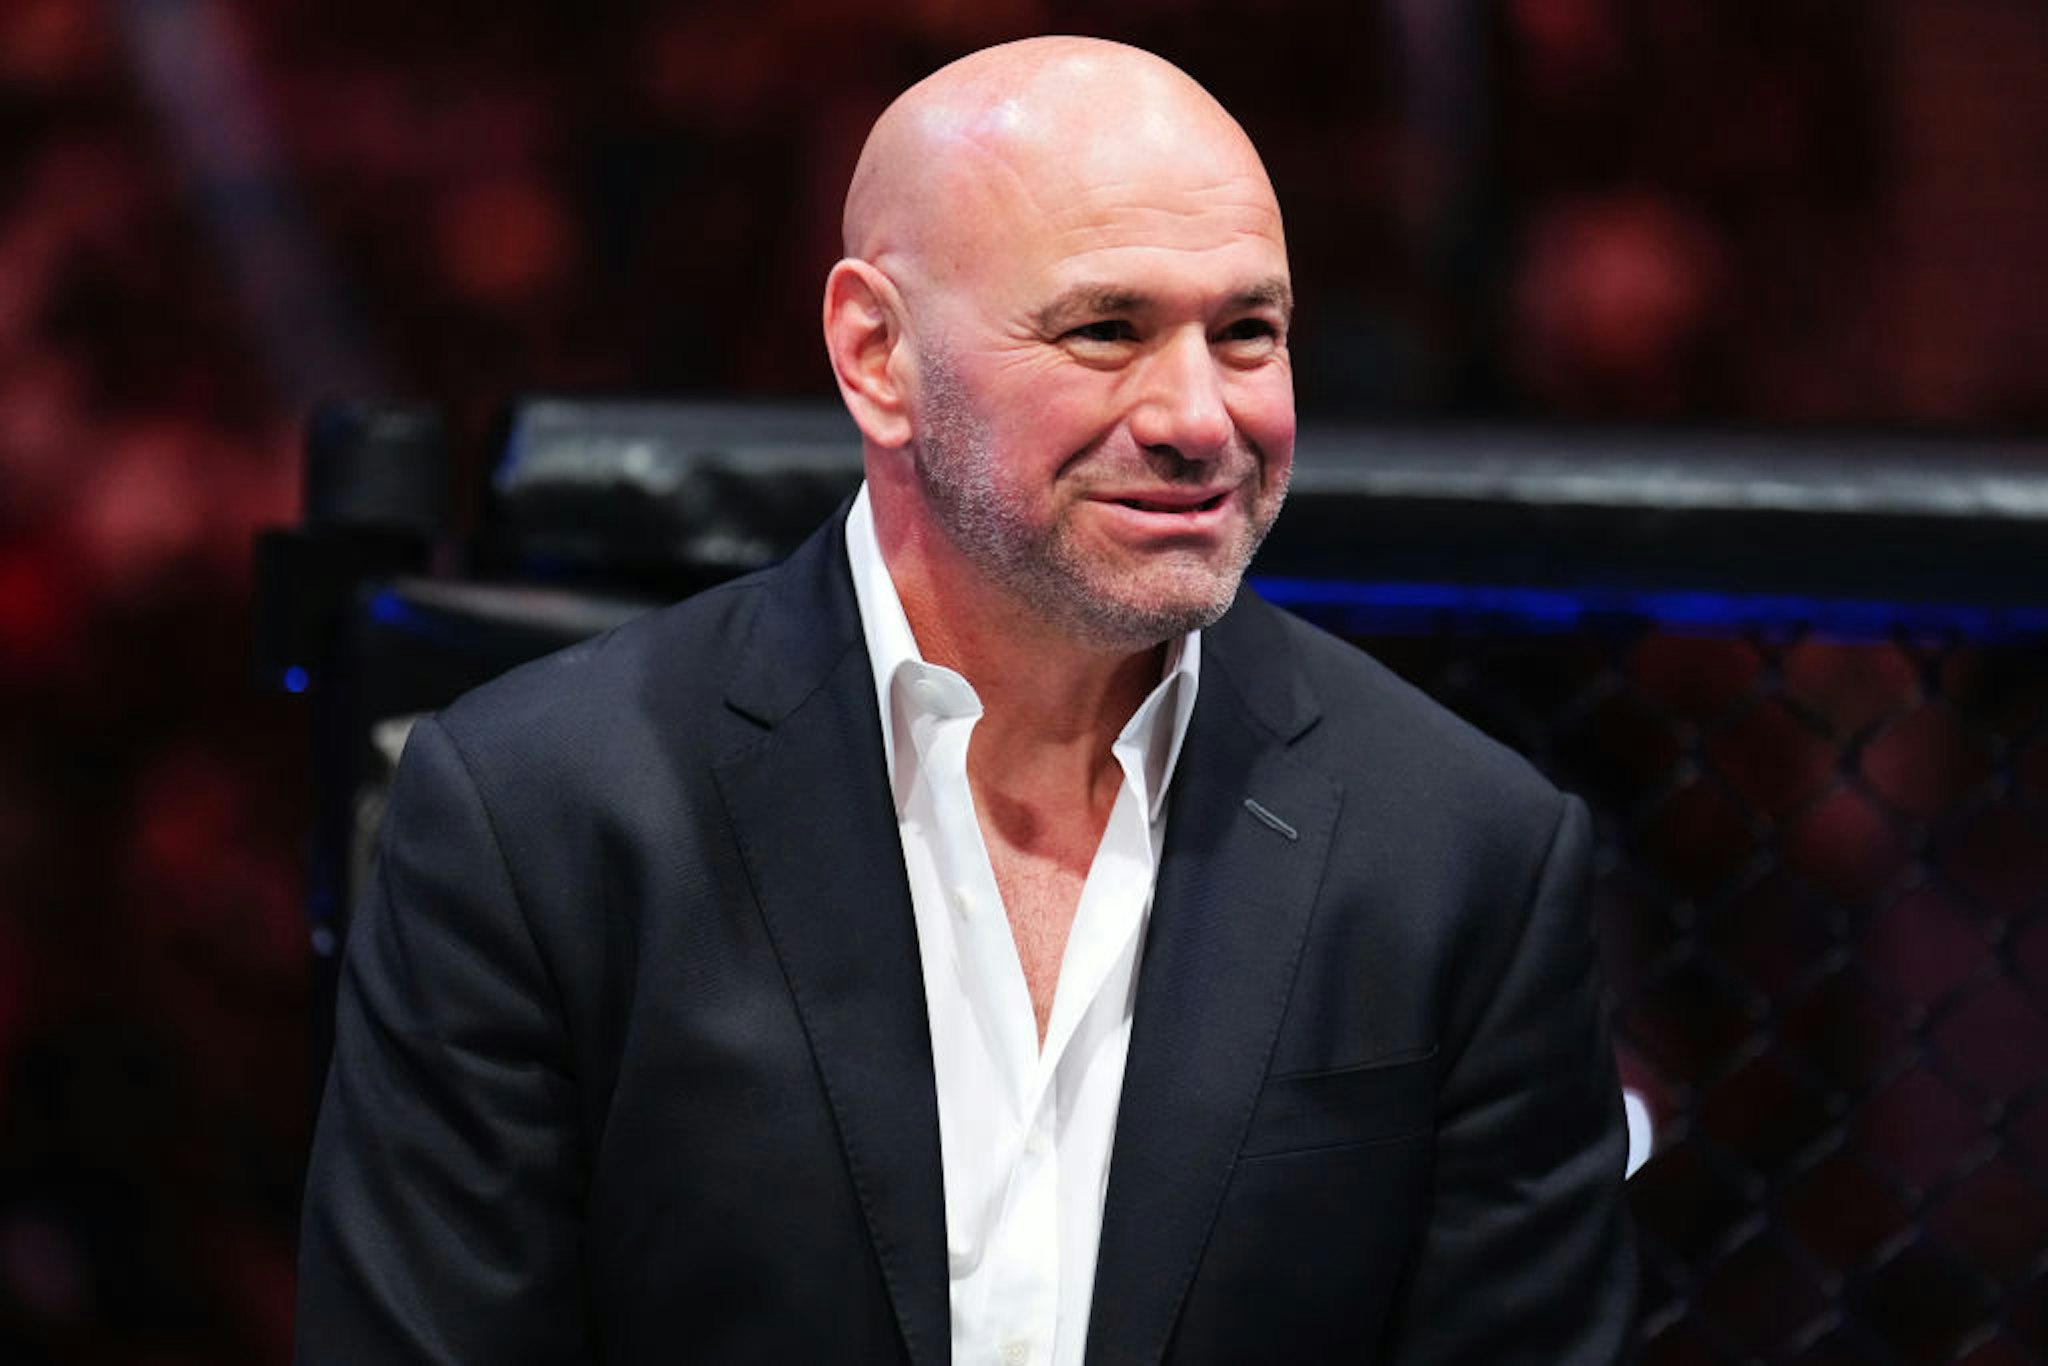 LAS VEGAS, NEVADA - JULY 08: Dana White enters the Octagon during the UFC 290 event at T-Mobile Arena on July 08, 2023 in Las Vegas, Nevada. (Photo by Chris Unger/Zuffa LLC via Getty Images)